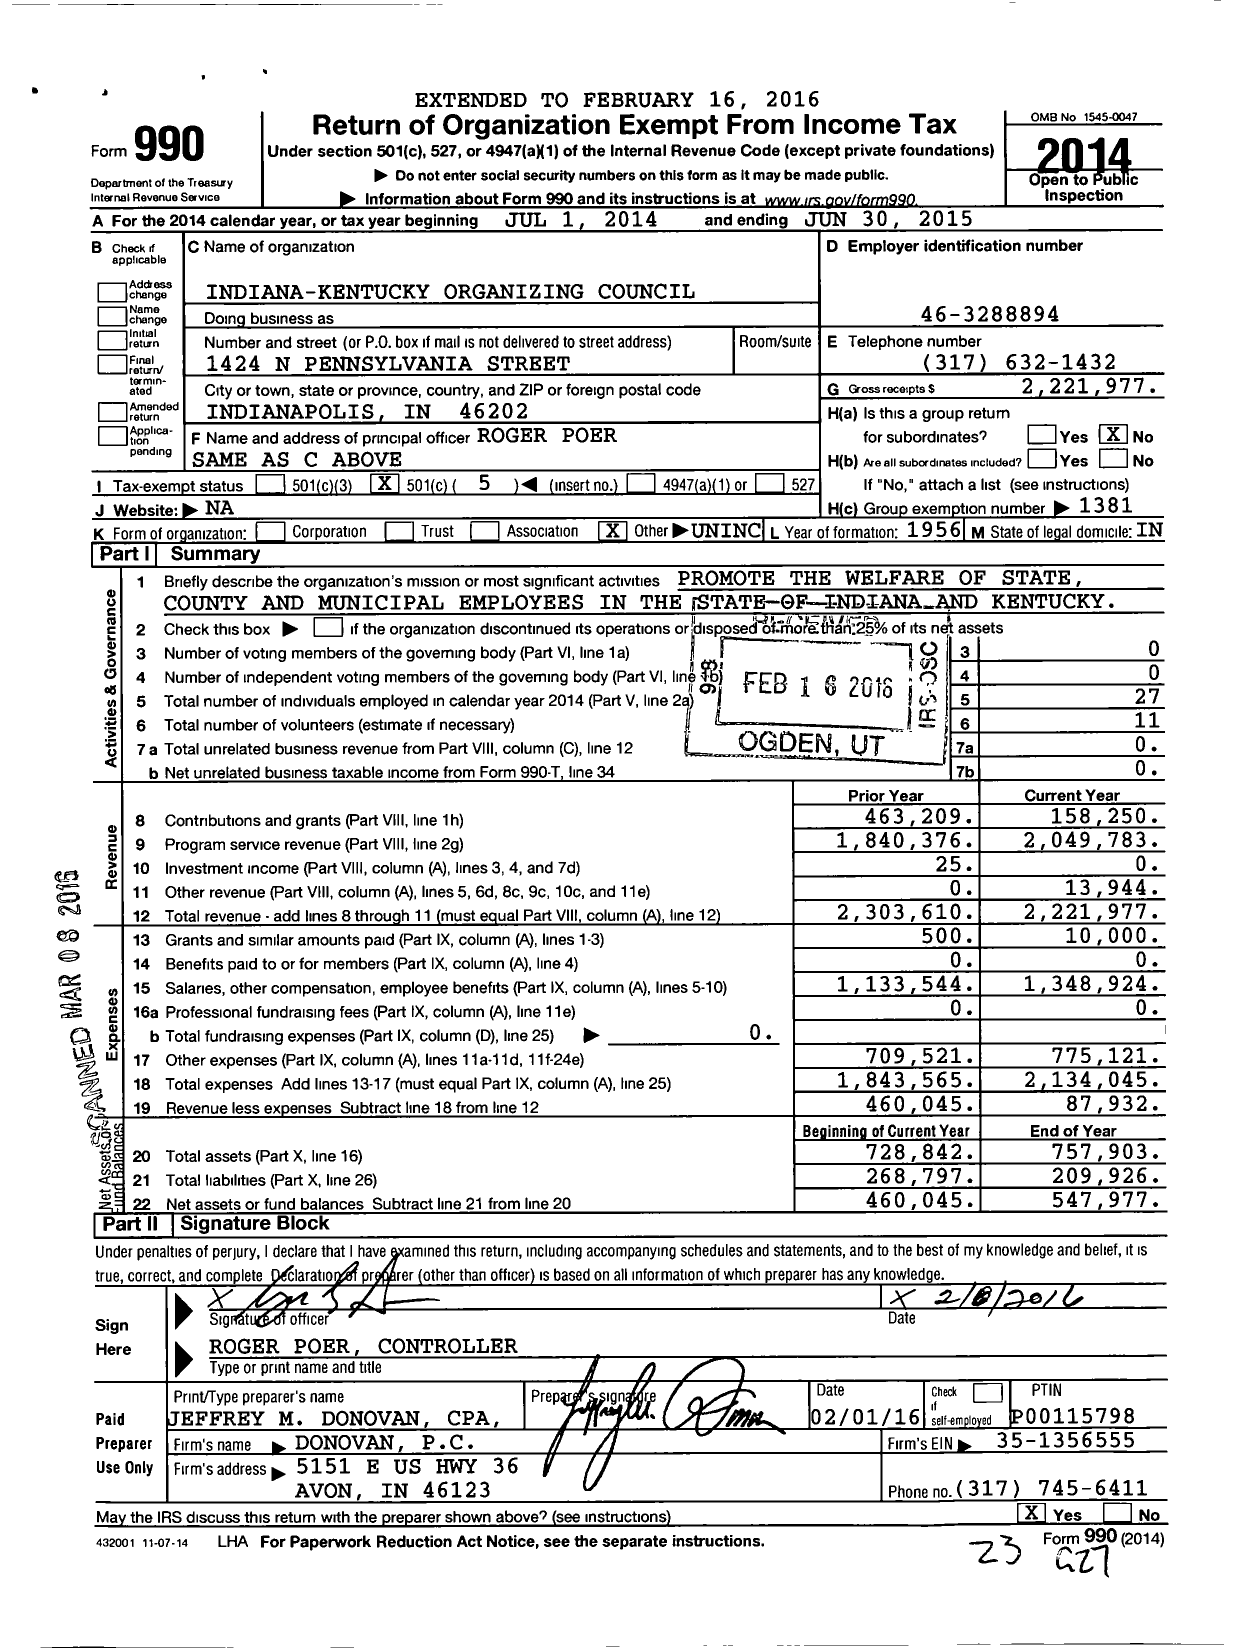 Image of first page of 2014 Form 990O for American Federation of State County & Municipal Employees - Indiana-Kentucky Organizing Council